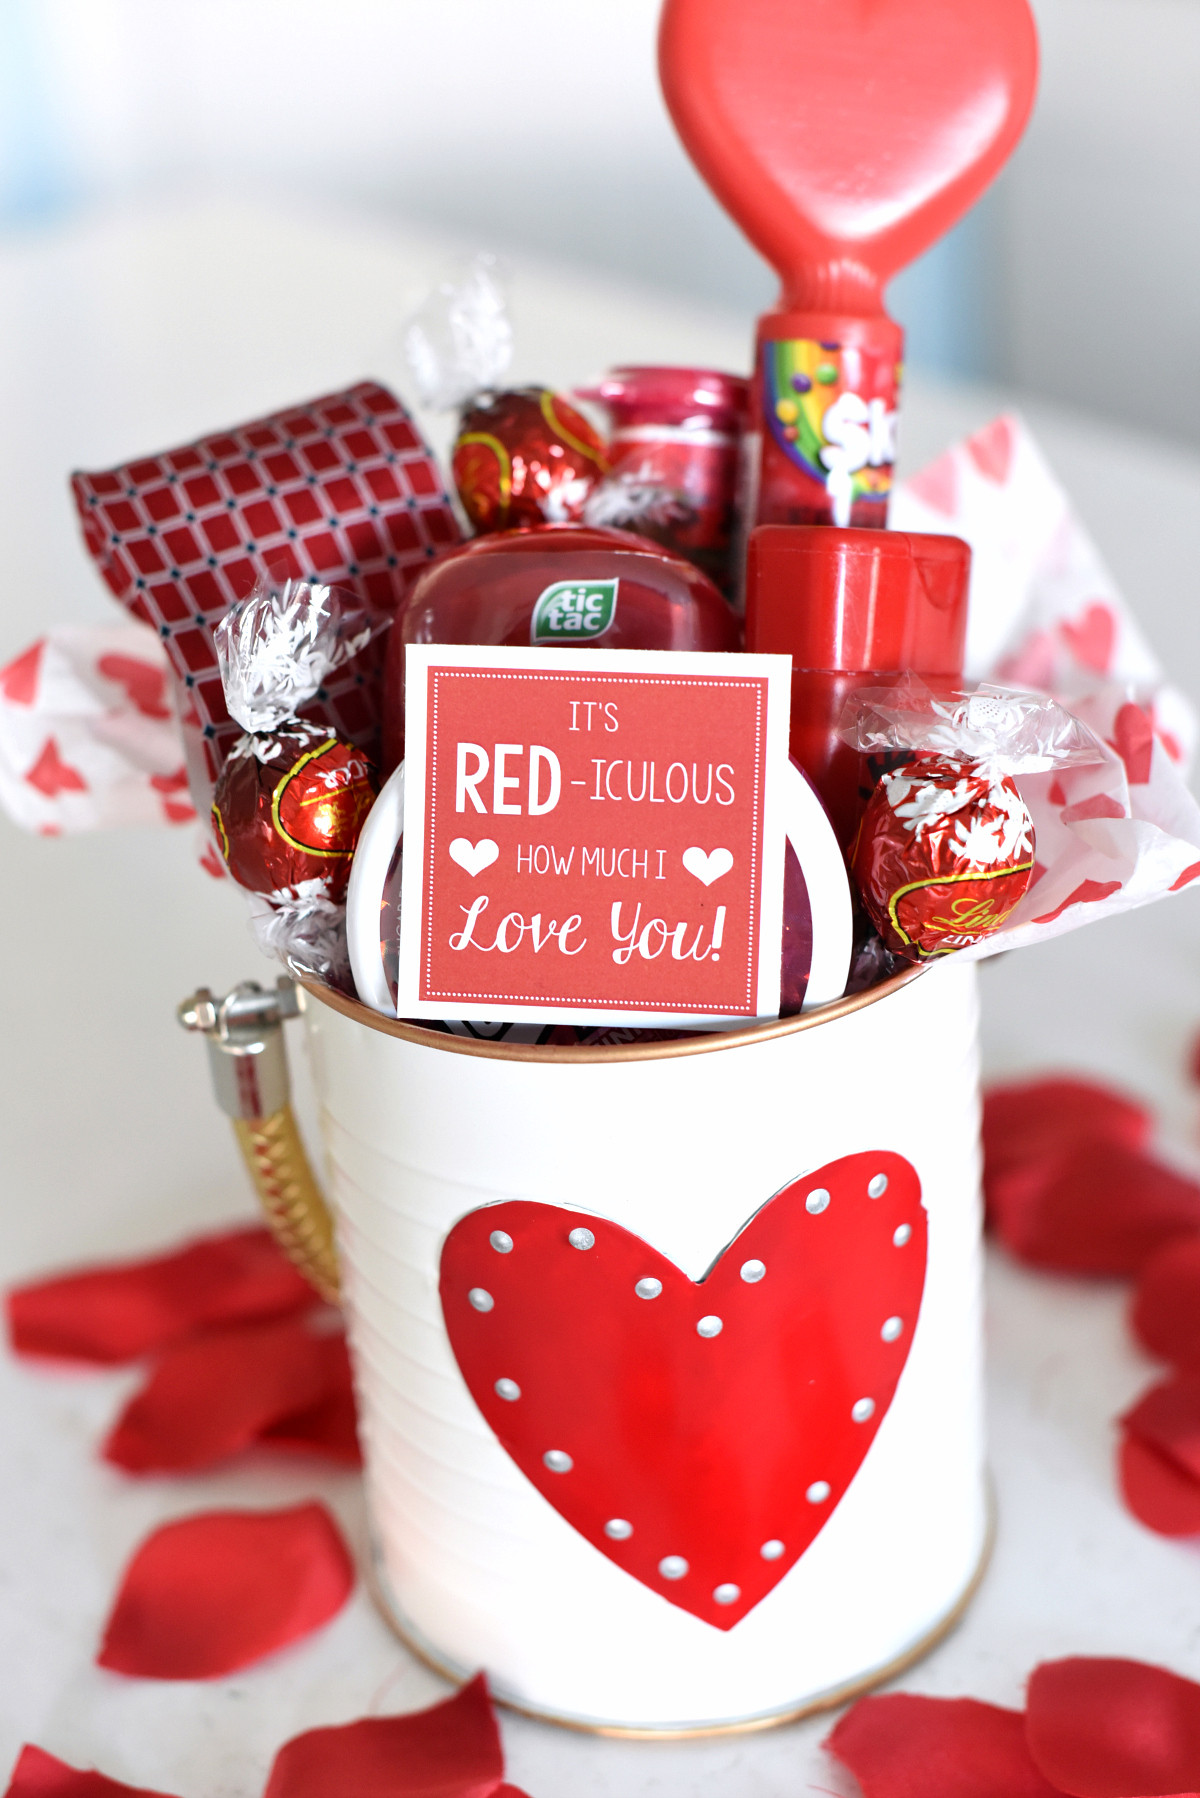 Valentines Gift Baskets Kids
 Cute Valentine s Day Gift Idea RED iculous Basket